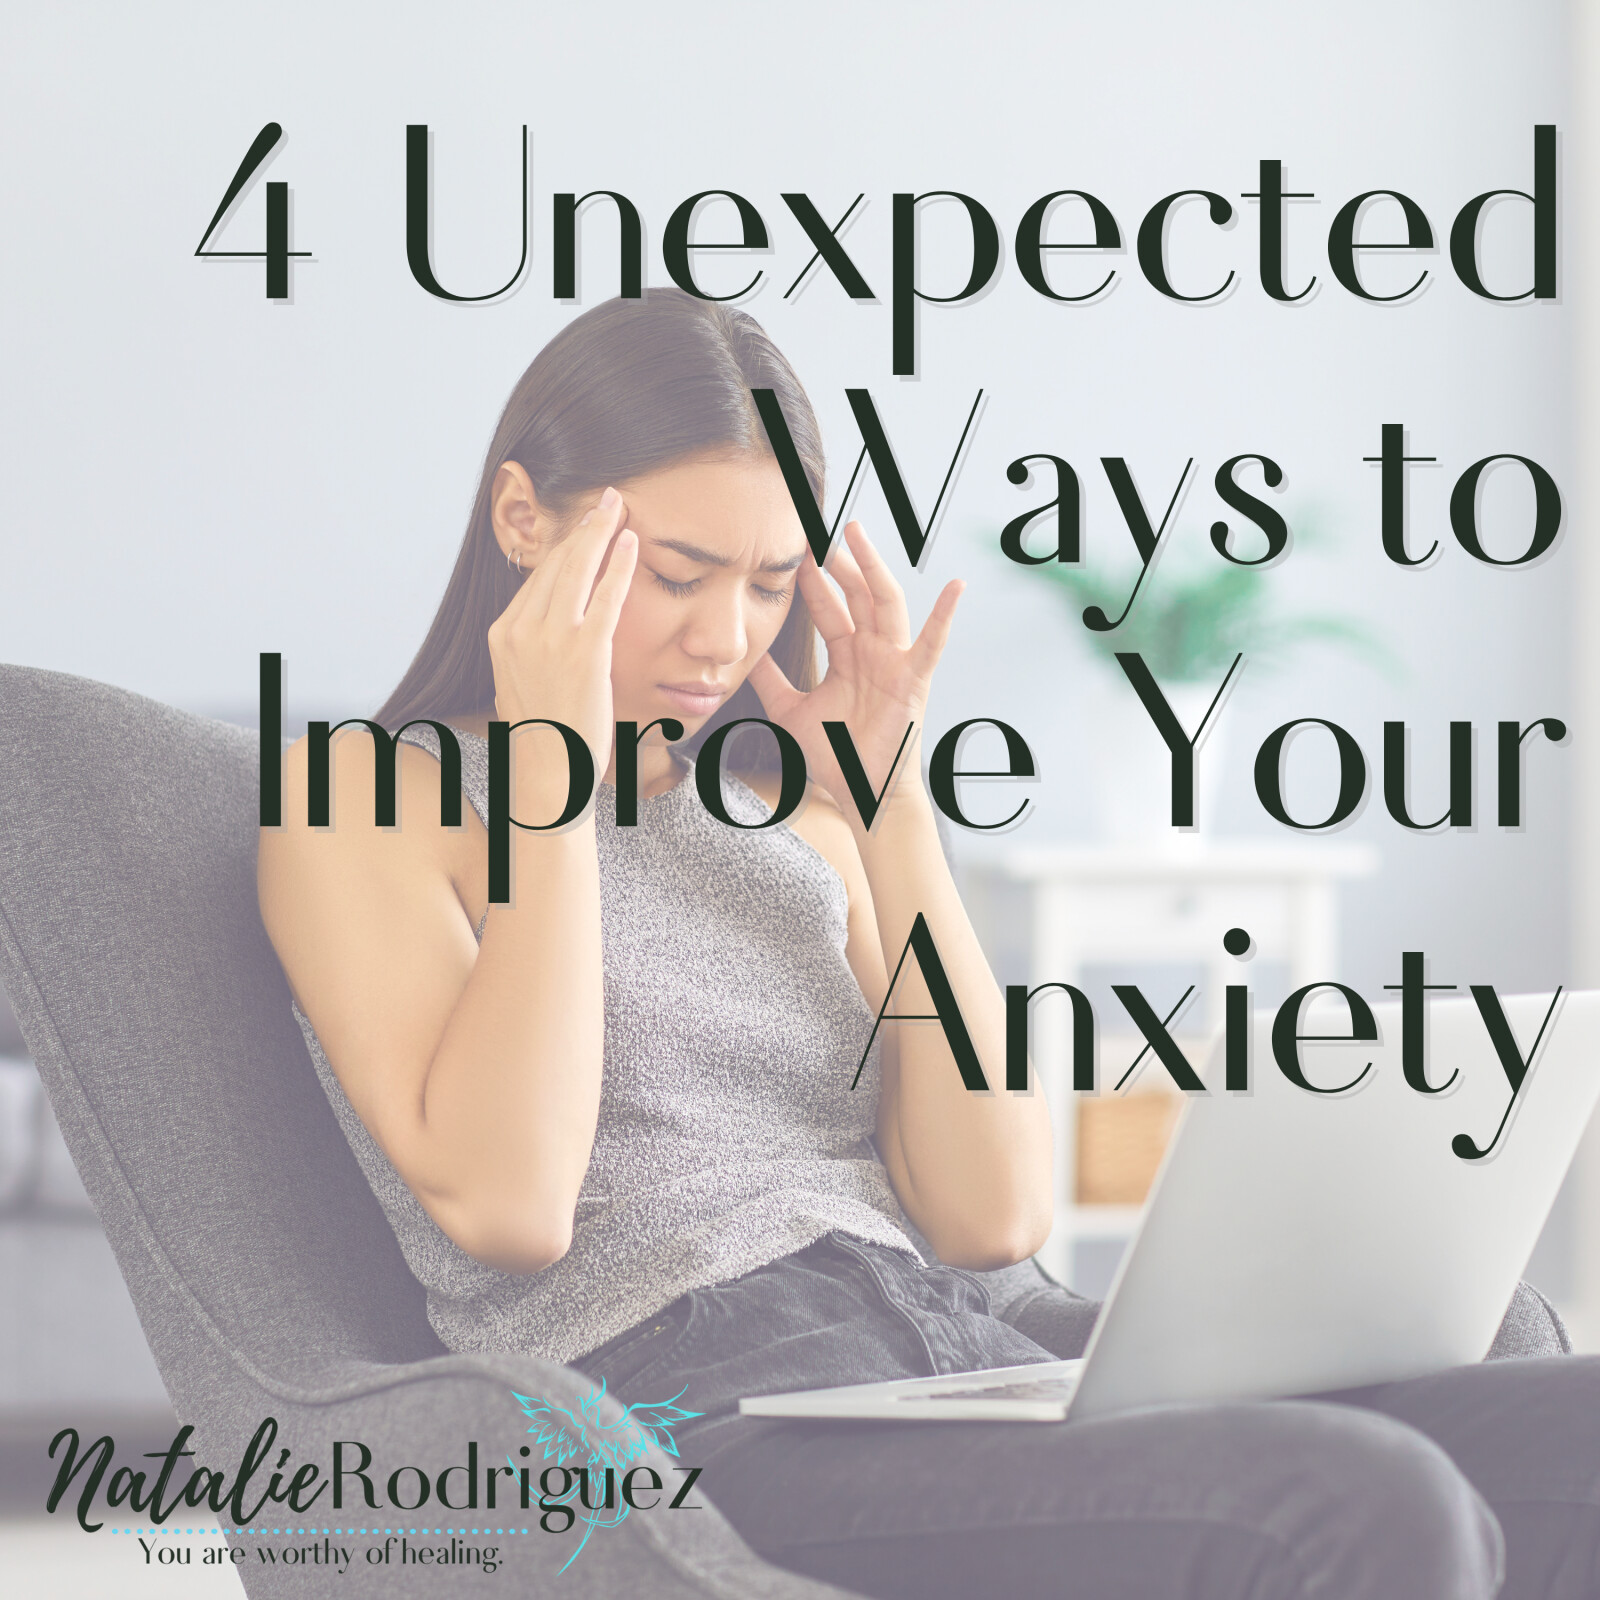 4 Unexpected Ways to Improve Anxiety - Part 3